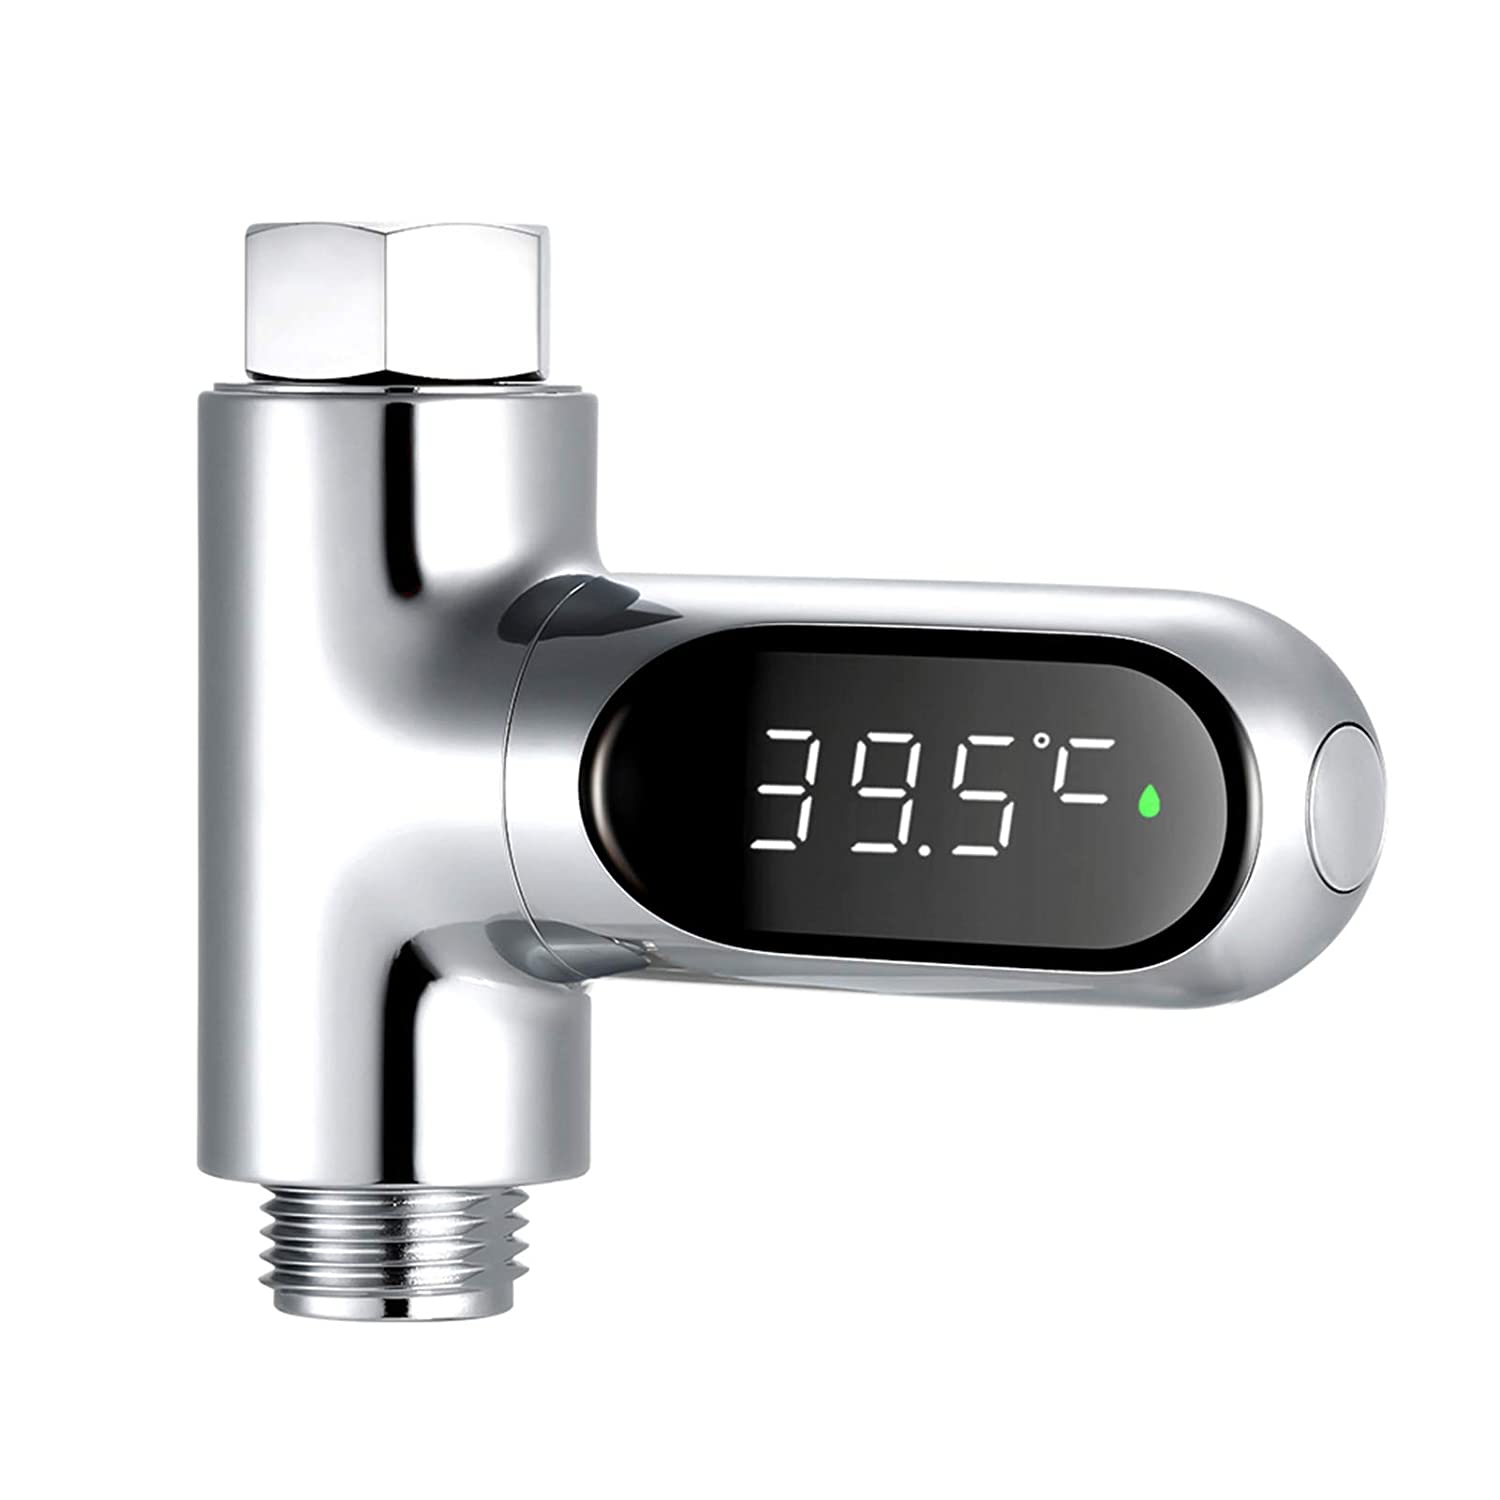 V2 Water Shower Thermometer LED Celsius Fahrenheit Time Display Flow Self-Generating Water Temperature Meter